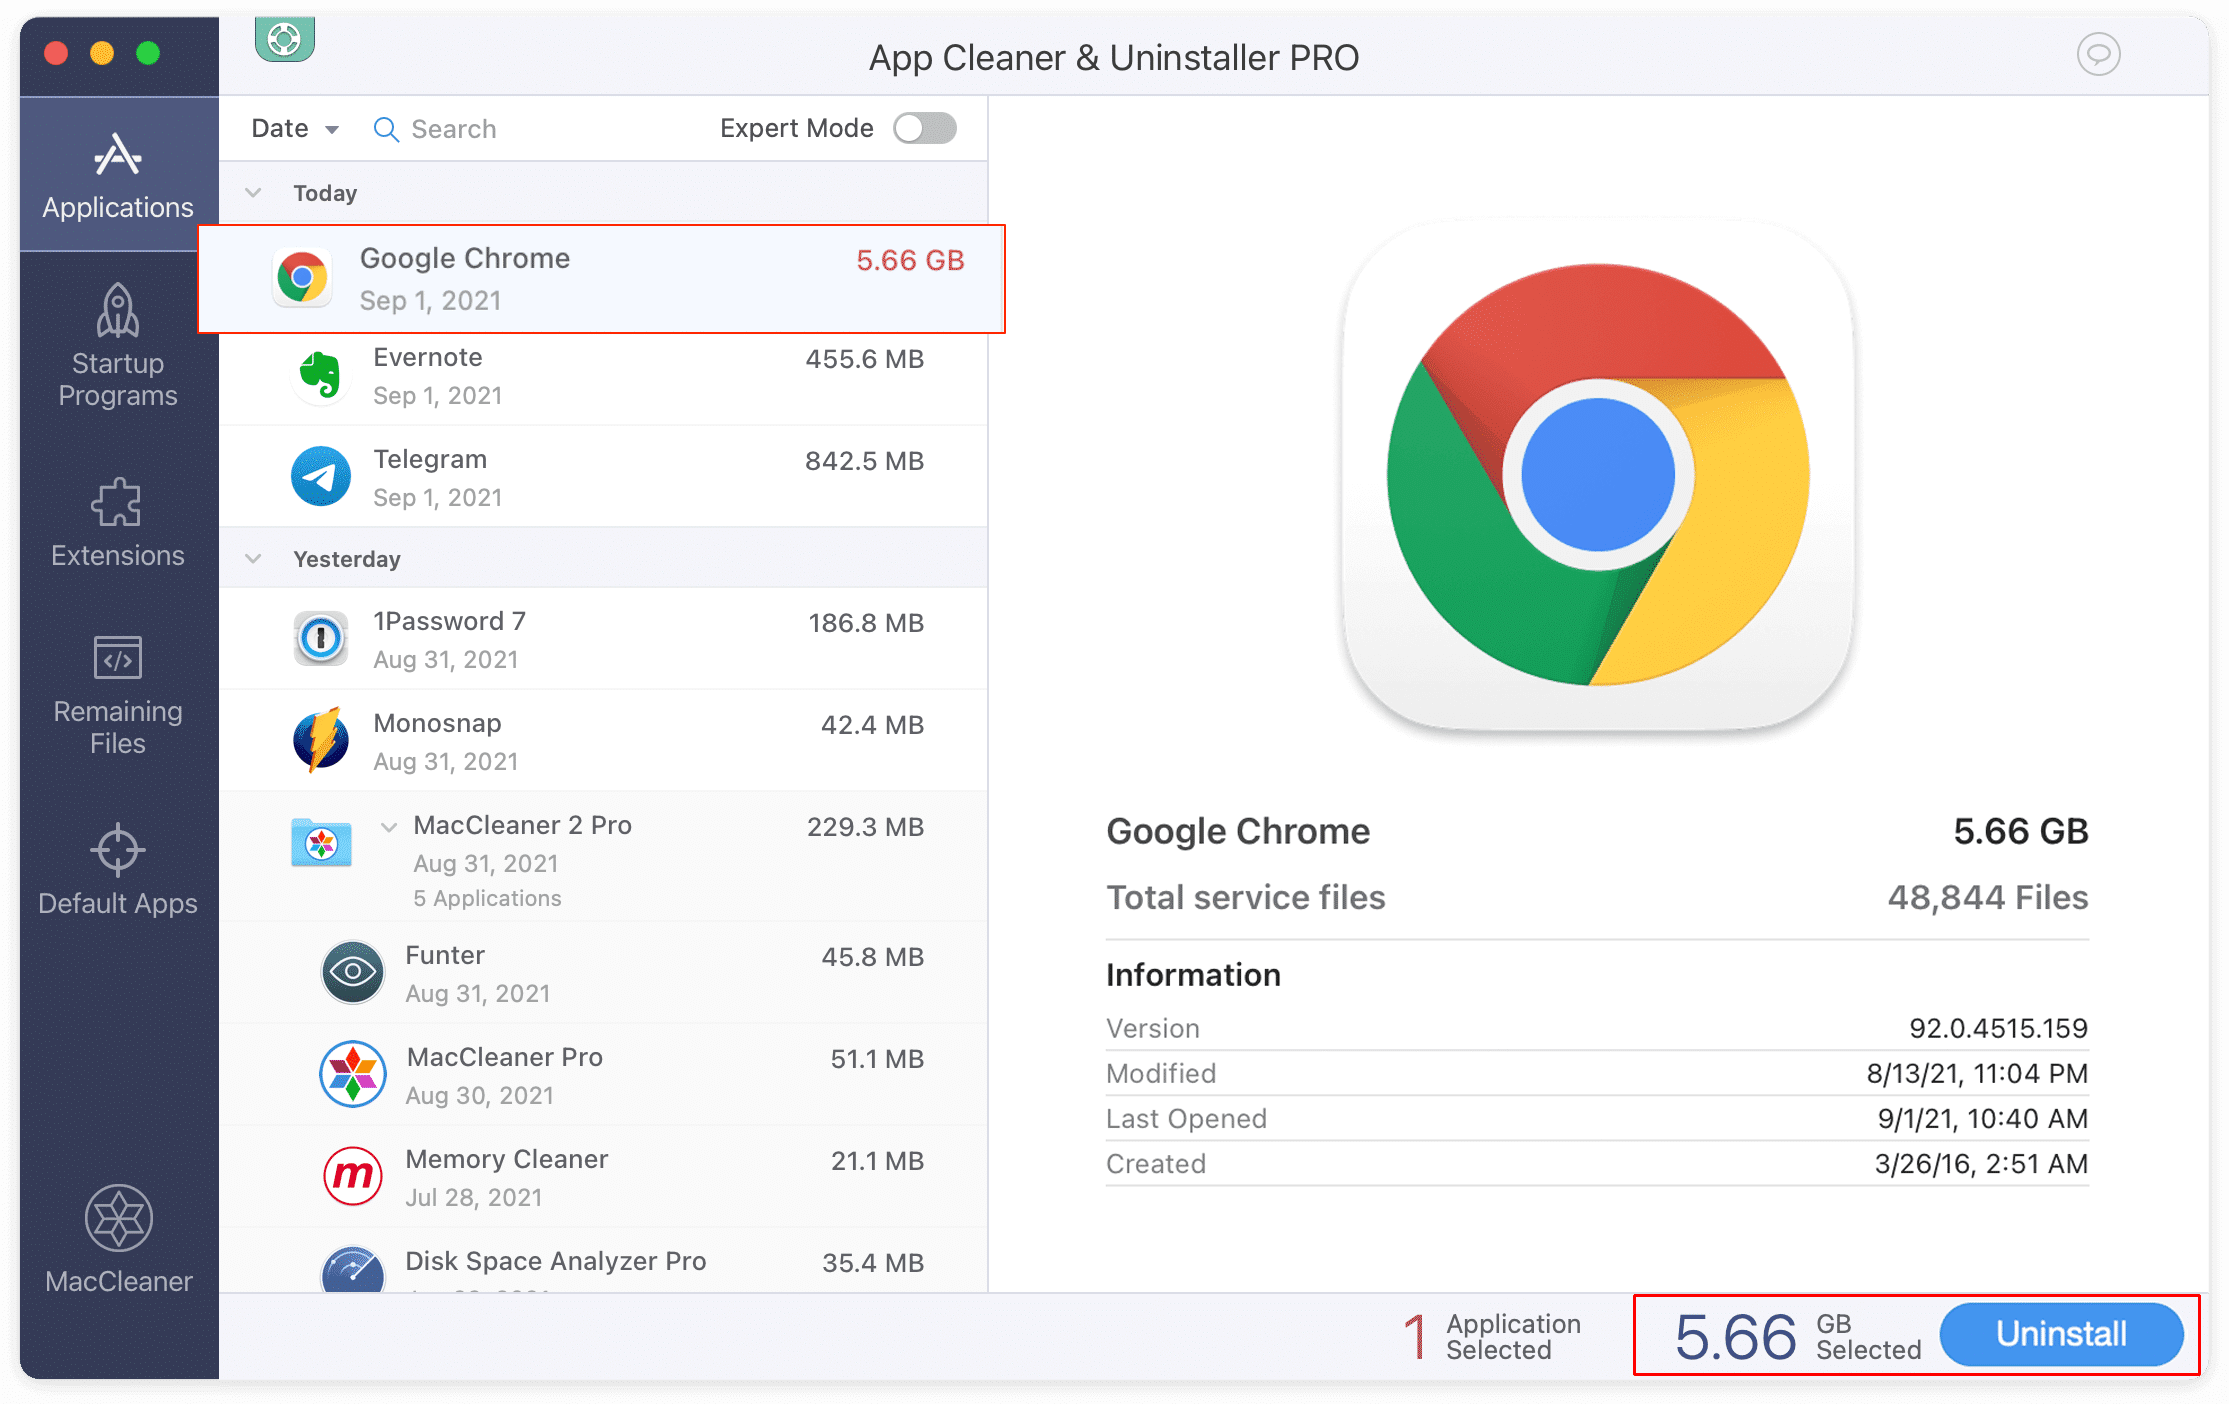 uninstalling a browser with App Cleaner & Uninstaller